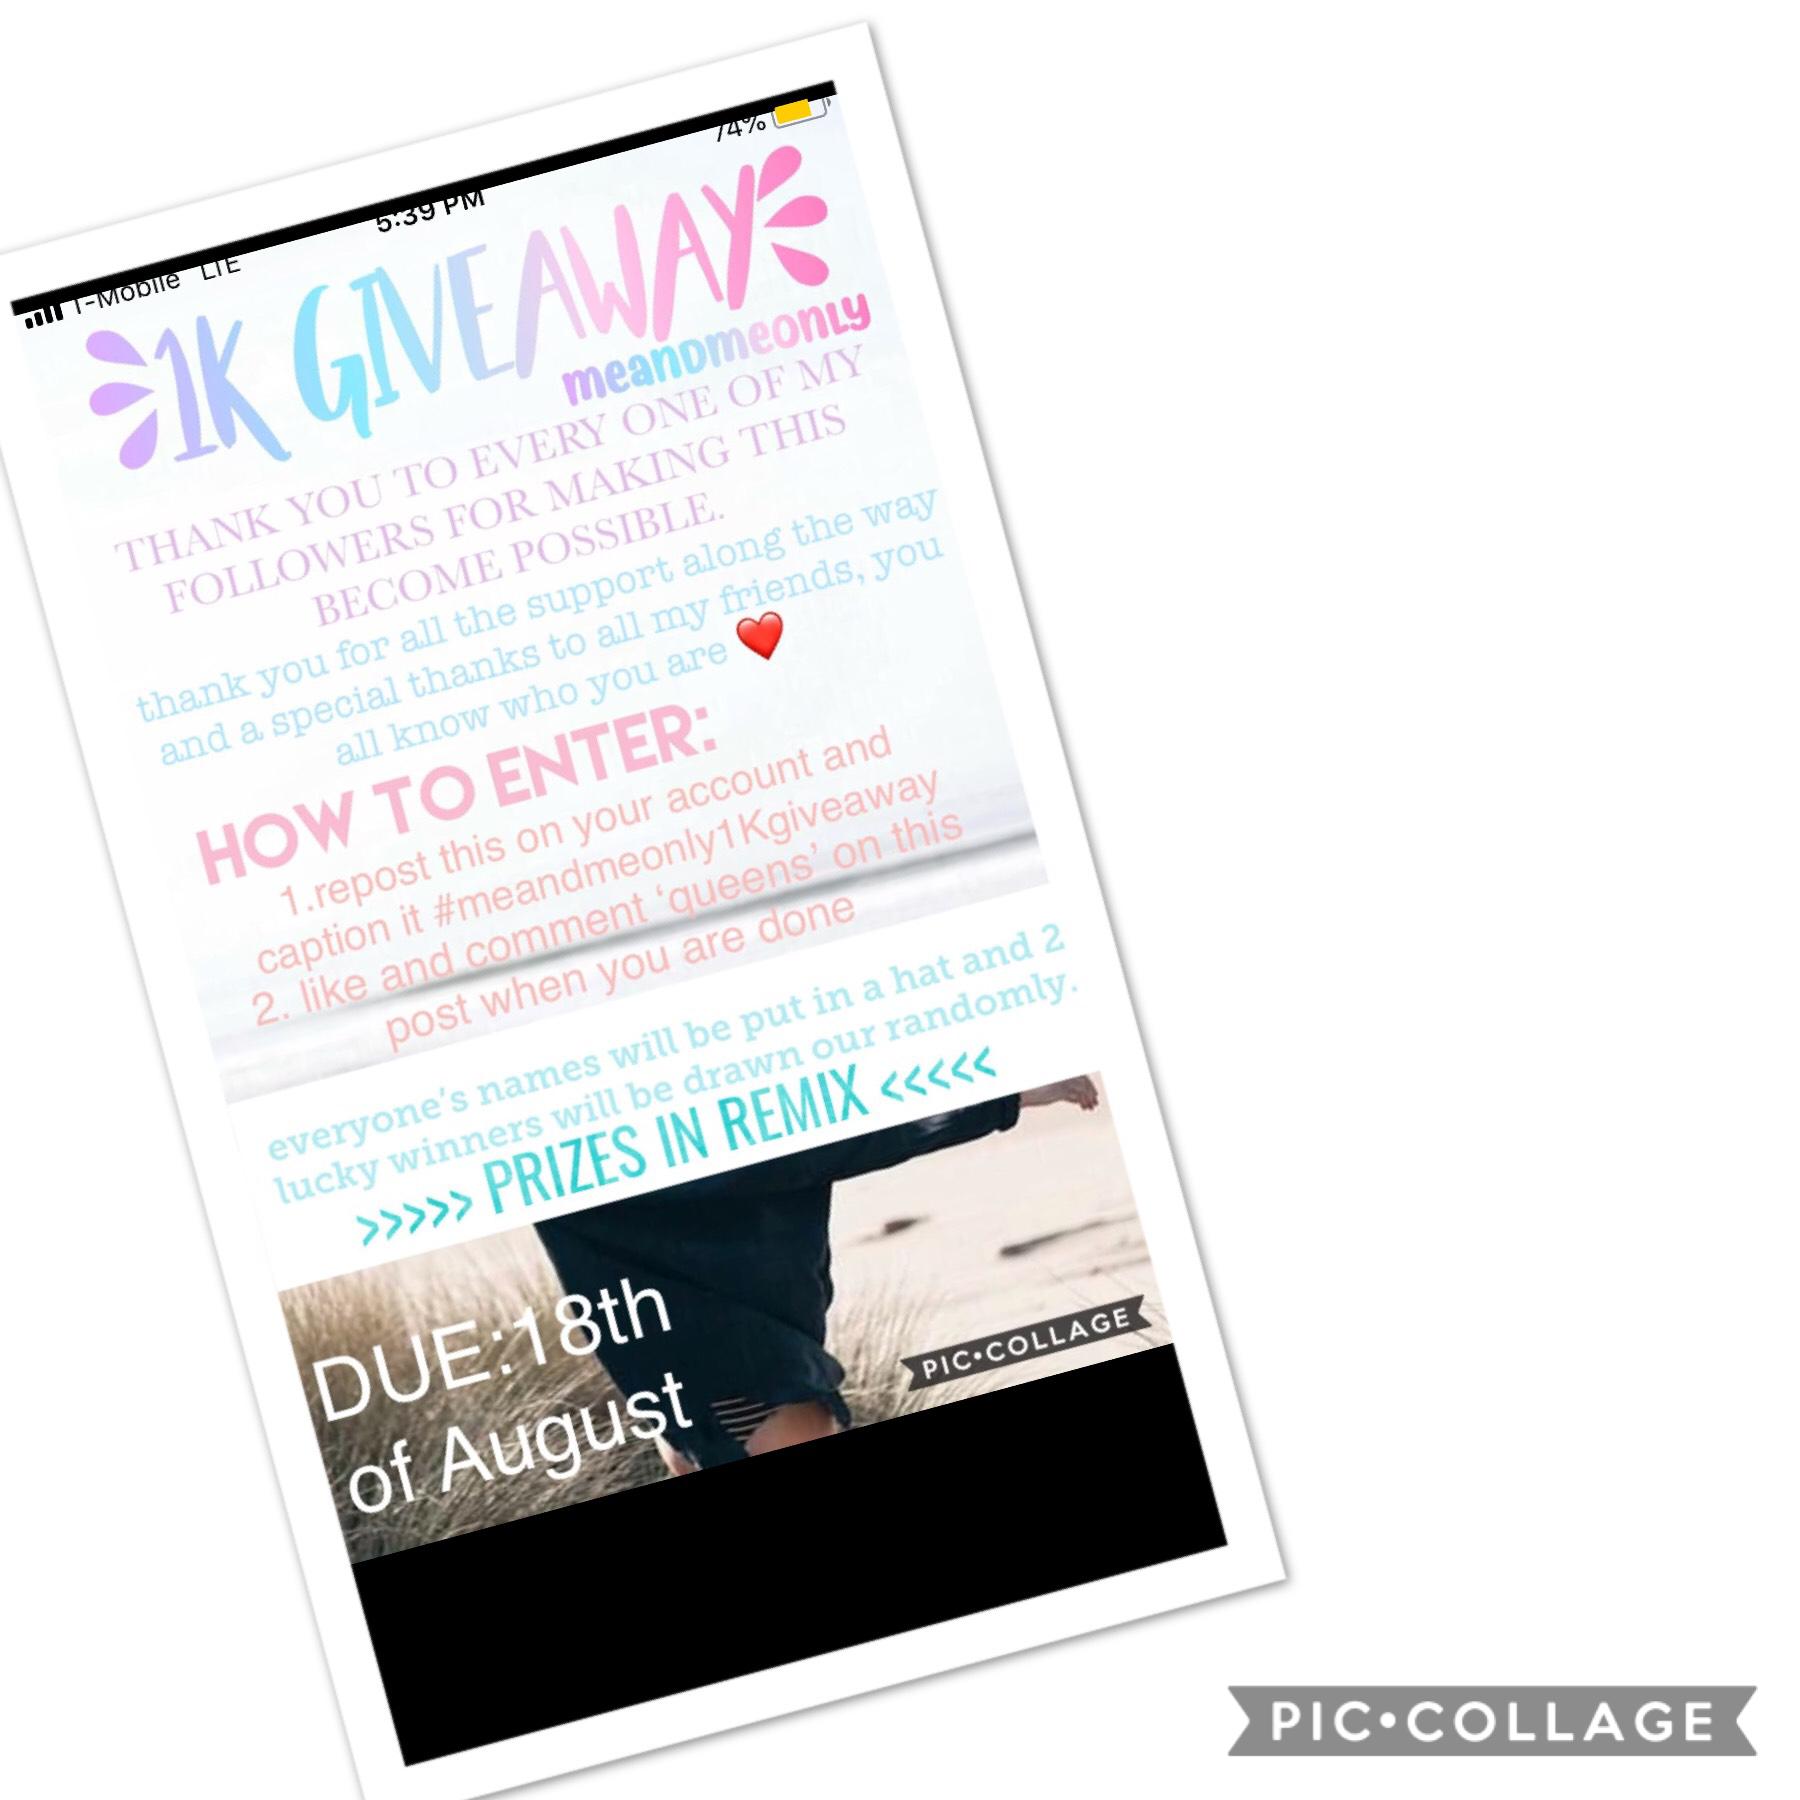 #meandmeonly1kgiveaway